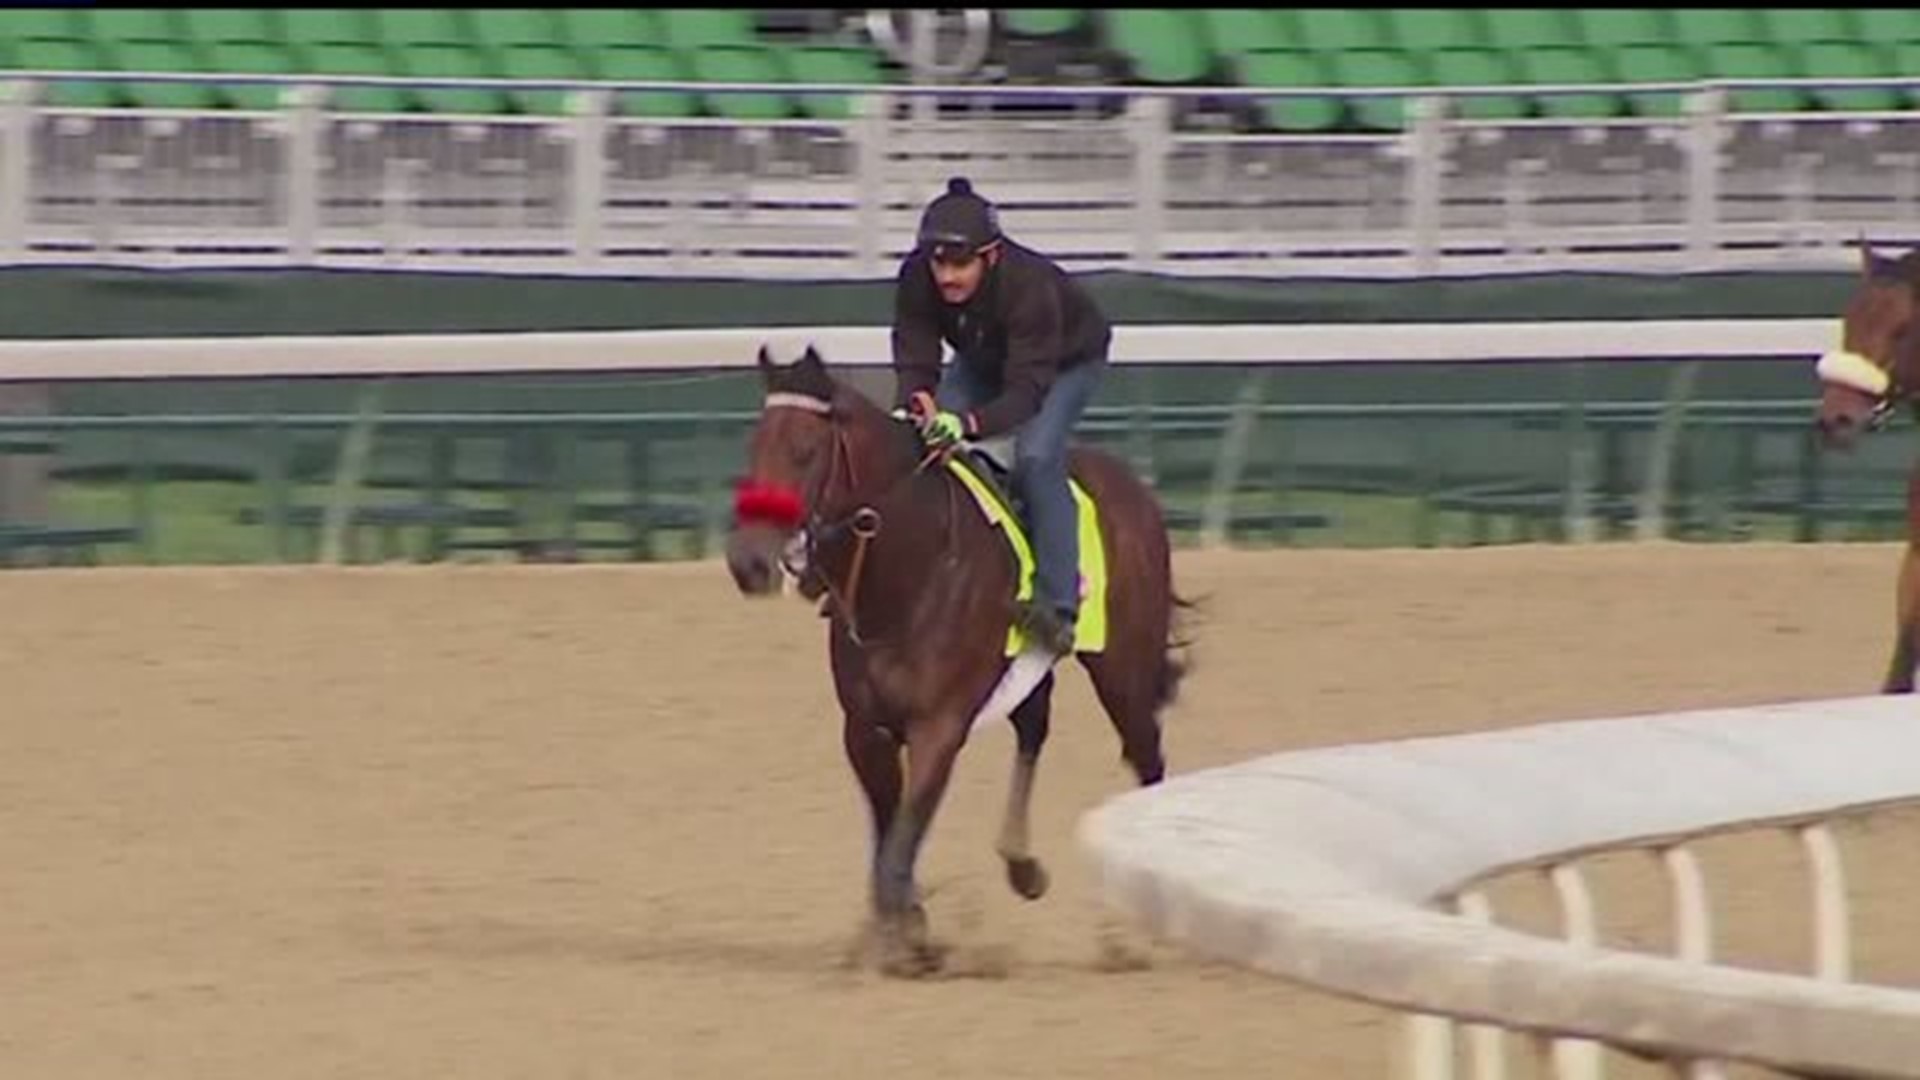 Kentucky Derby horse has Iowa connections